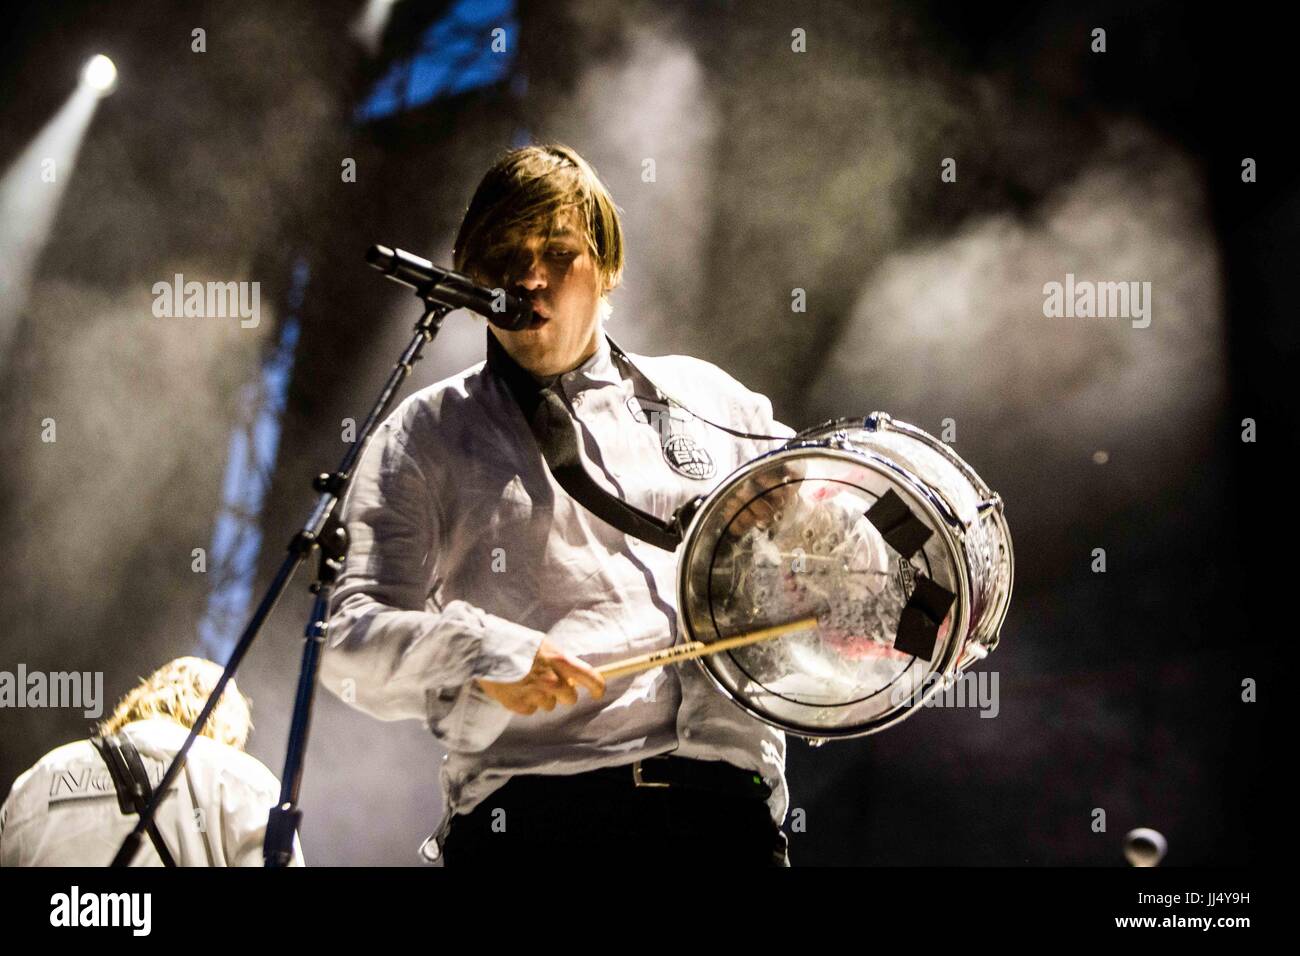 Milan, Italy. 17th July, 2017. William Butler of the canadian indie rock band Arcade Fire pictured on stage as they perform at Milano Summer Festival, Ippodromo San Siro Milan. Credit: Roberto Finizio/Pacific Press/Alamy Live News Stock Photo